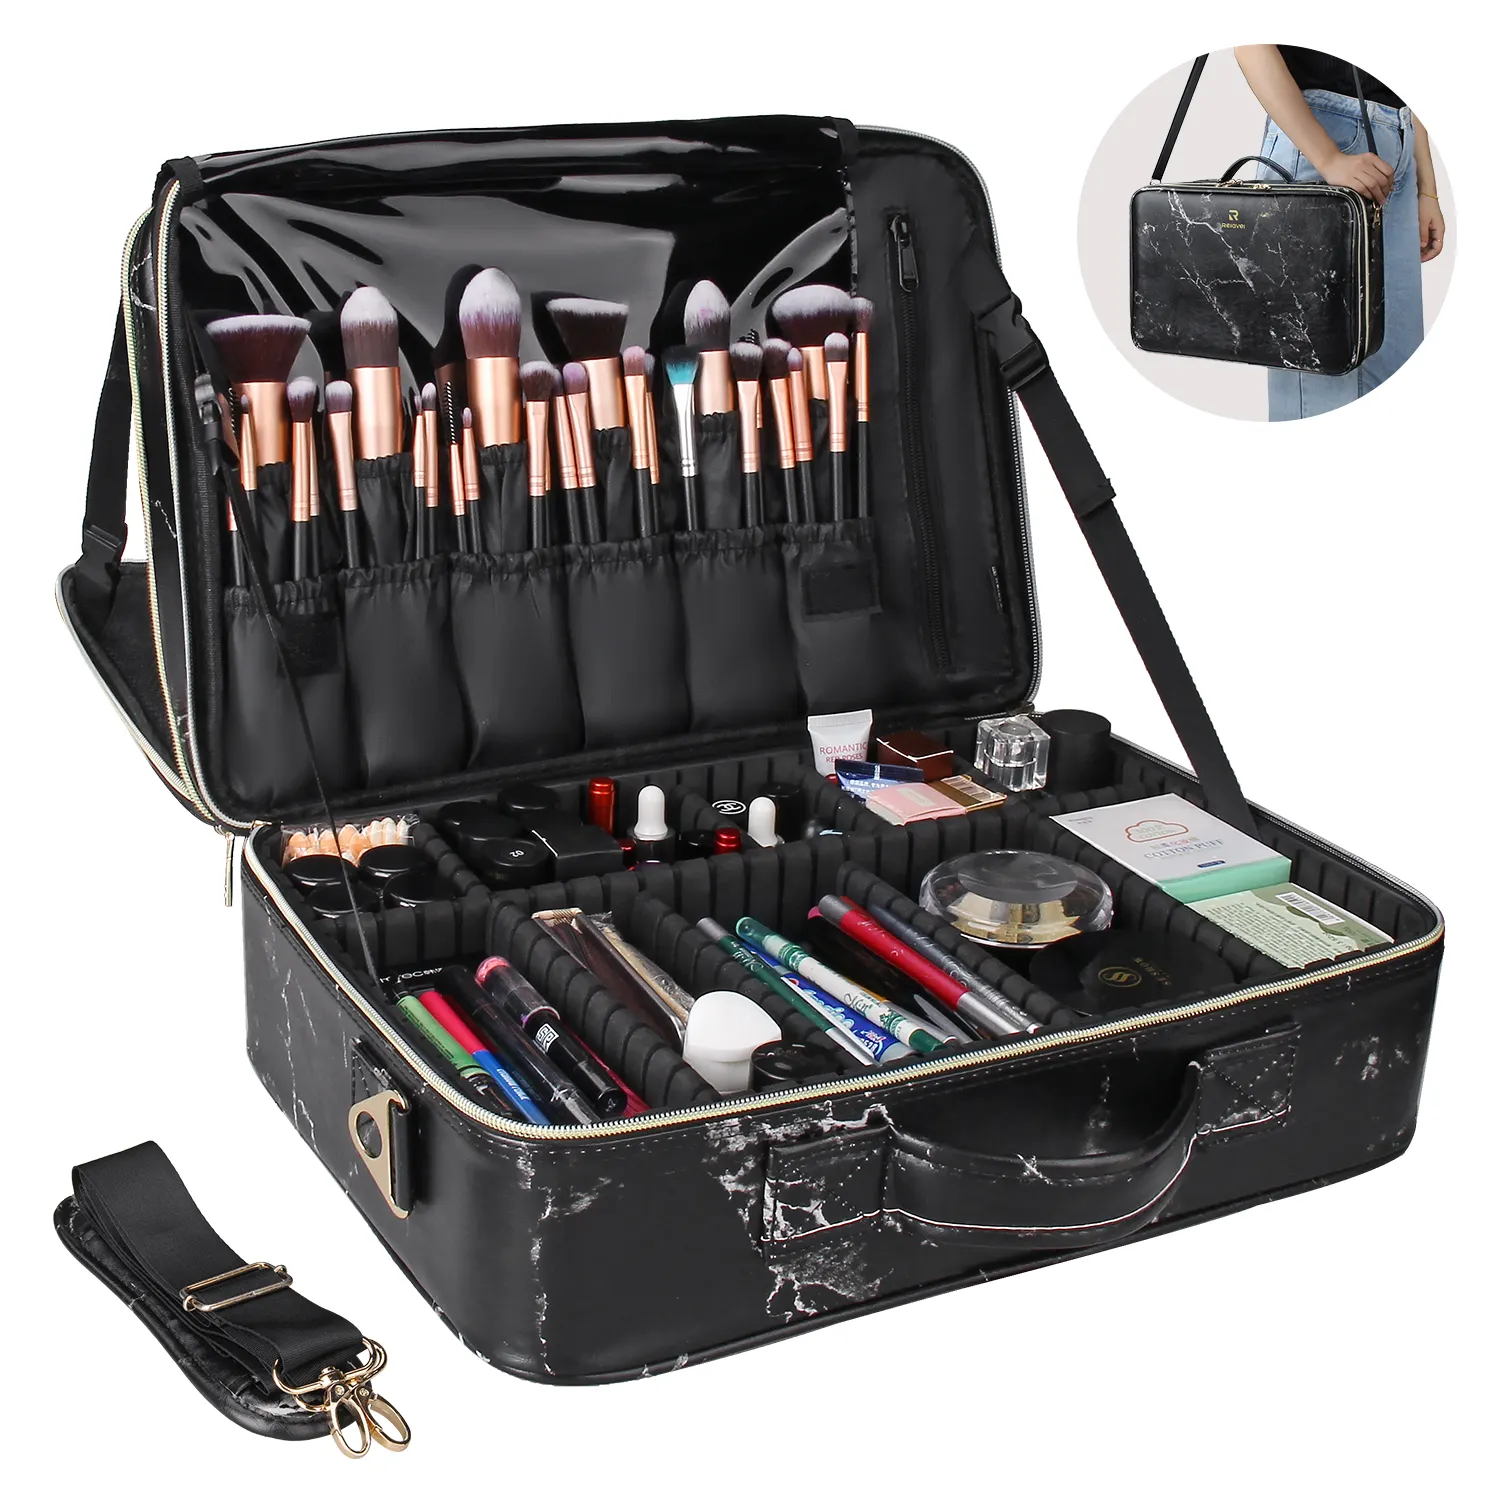 Relavel Portable Makeup Case Professional Large Train Case Travel Cosmetic Organizer Brush Holder Cosmetic Display Case